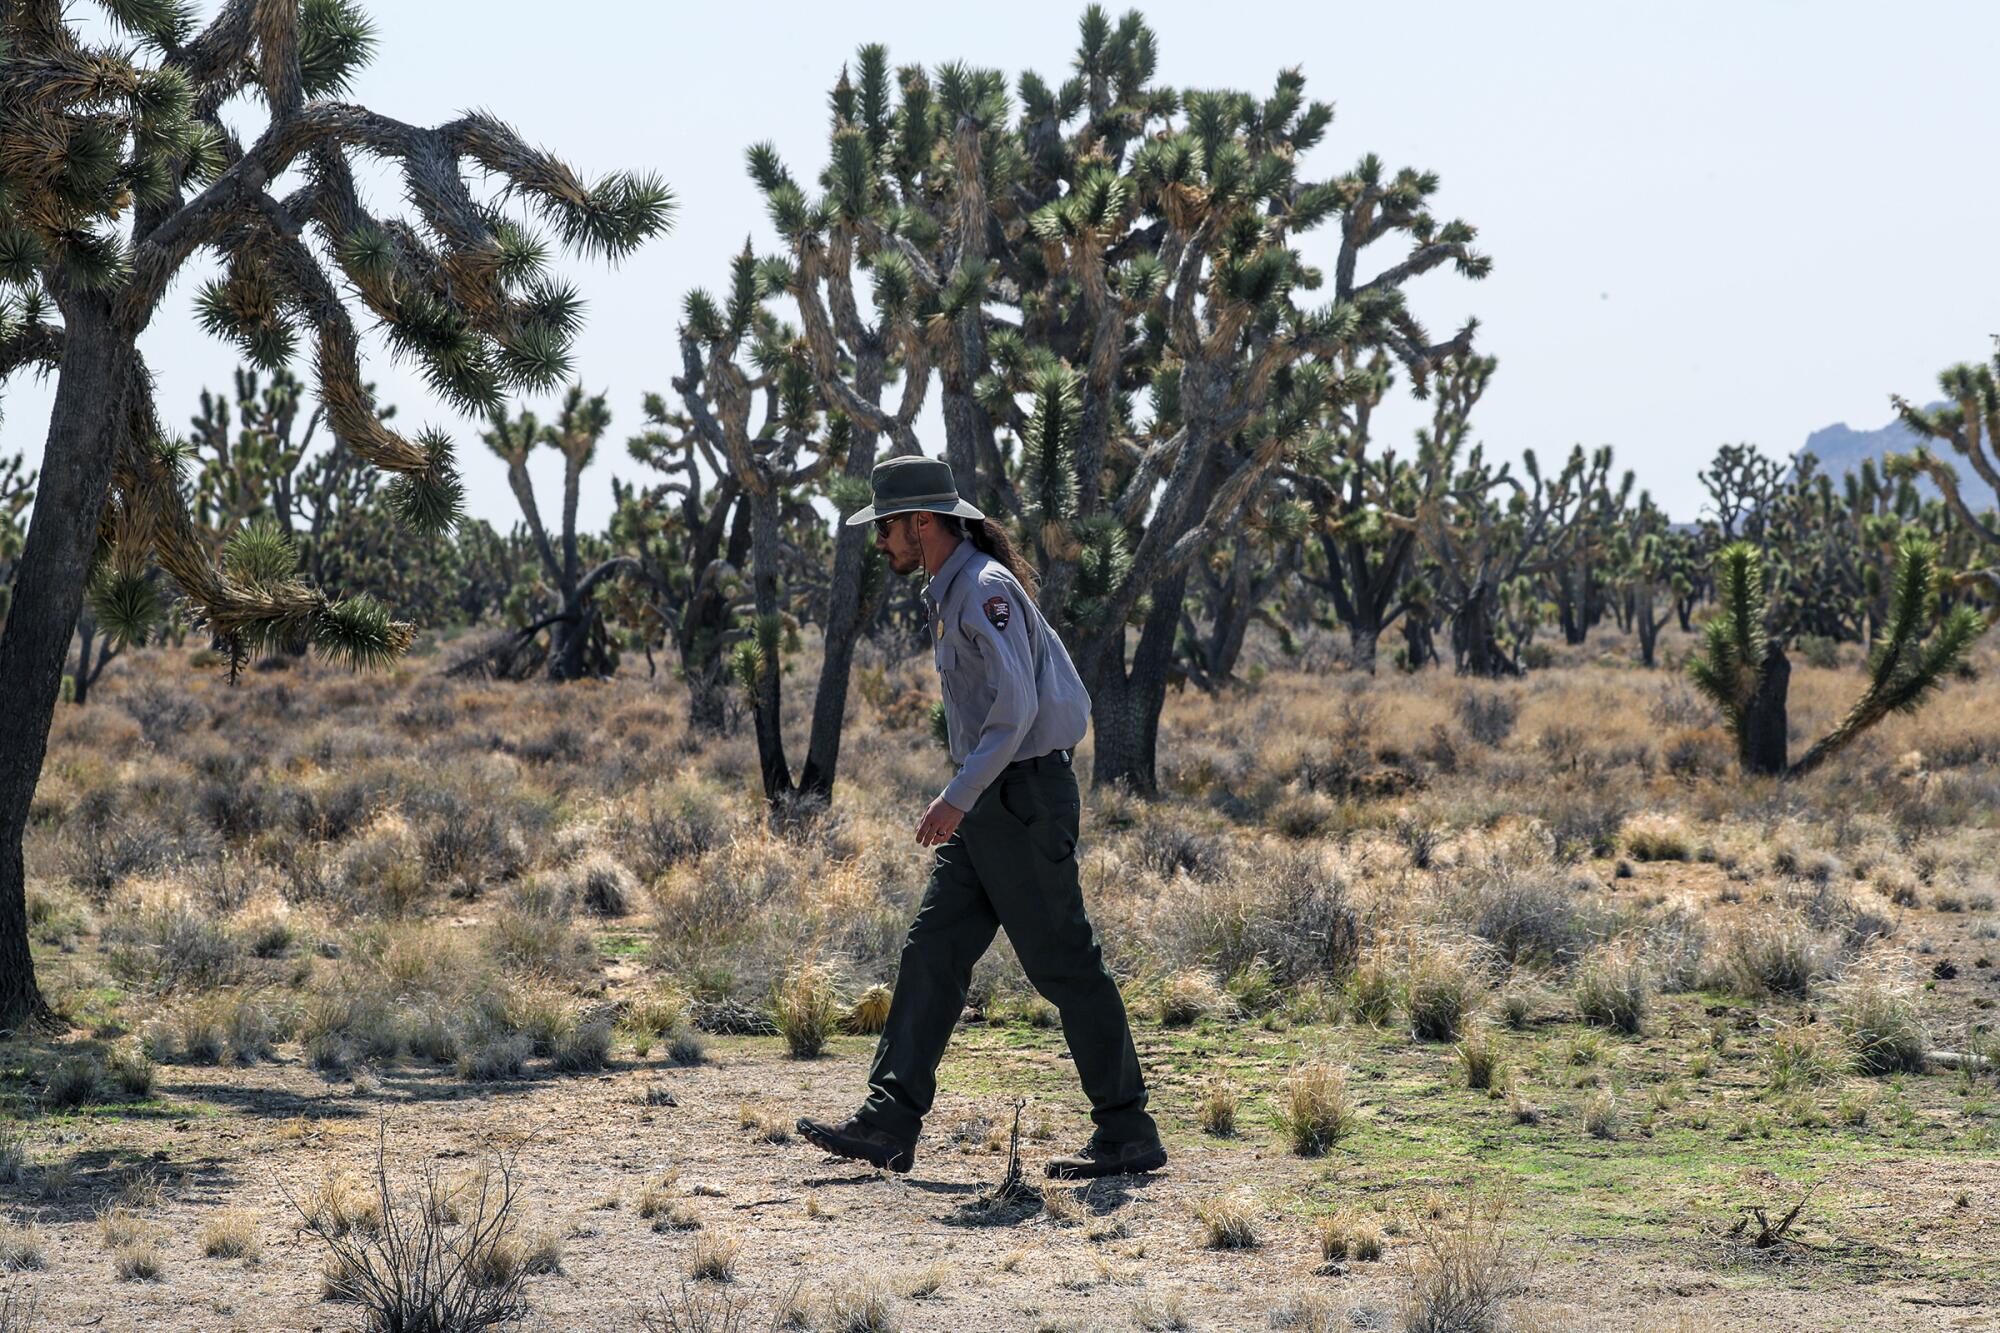  Drew Kaiser checks for red brome, an  invasive grass, in an unburned portion of the Joshua tree forest.